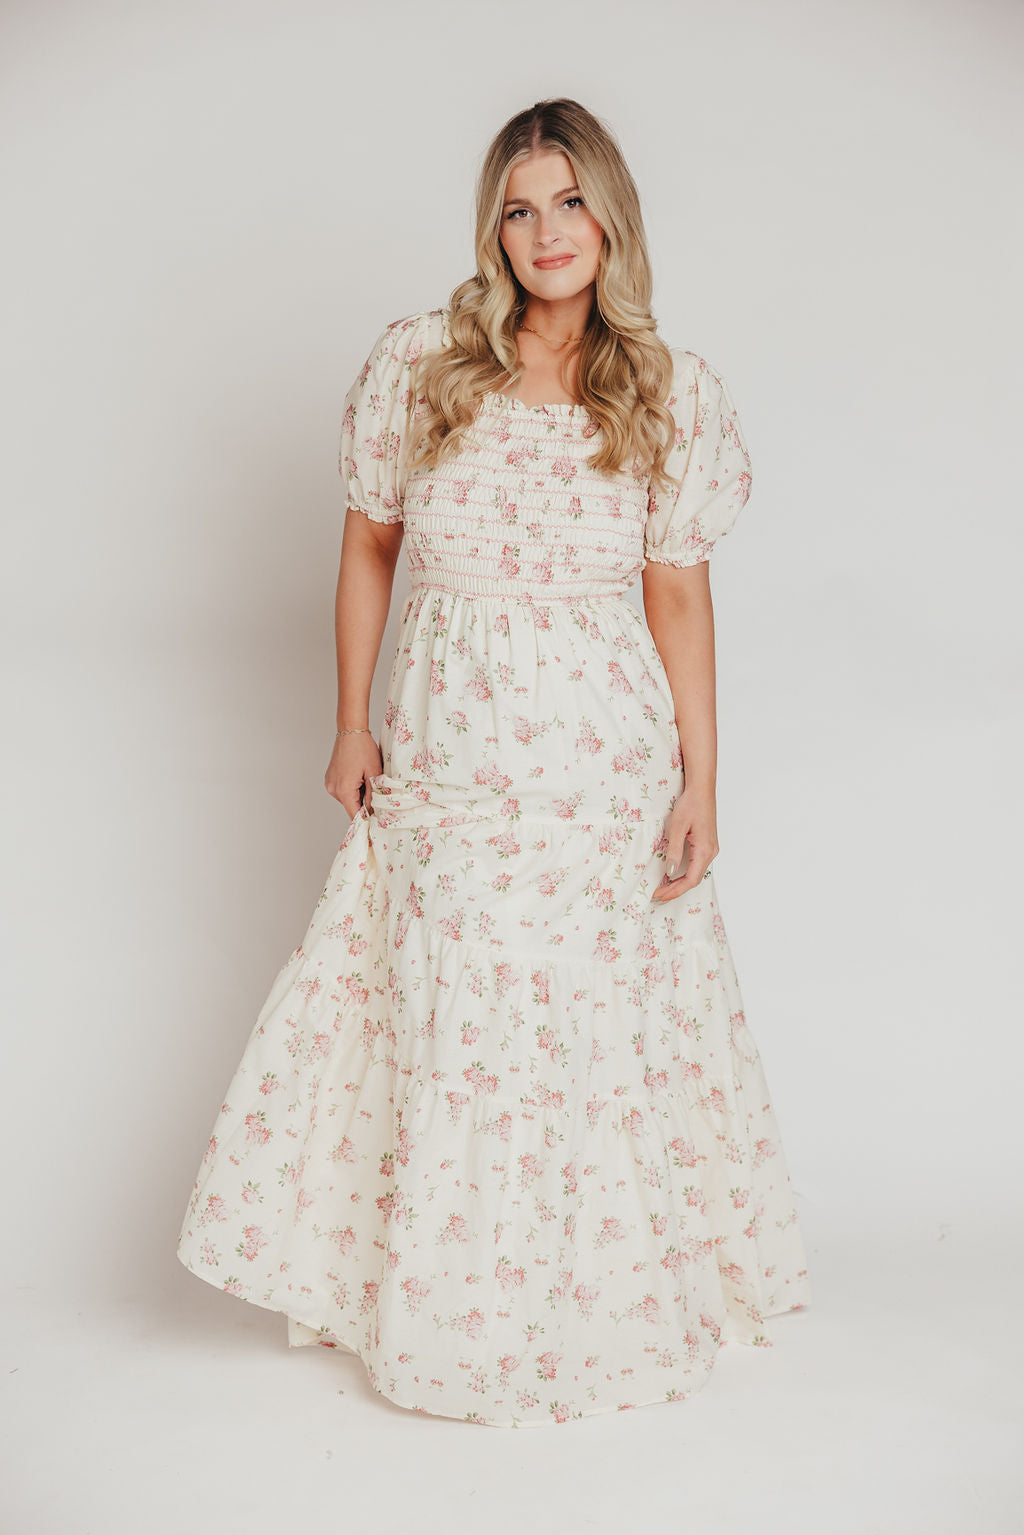 Harper Worth Maxi Dress in Ivory/Pink Floral - Inclusive Sizing (S-3XL) - Bump Friendly